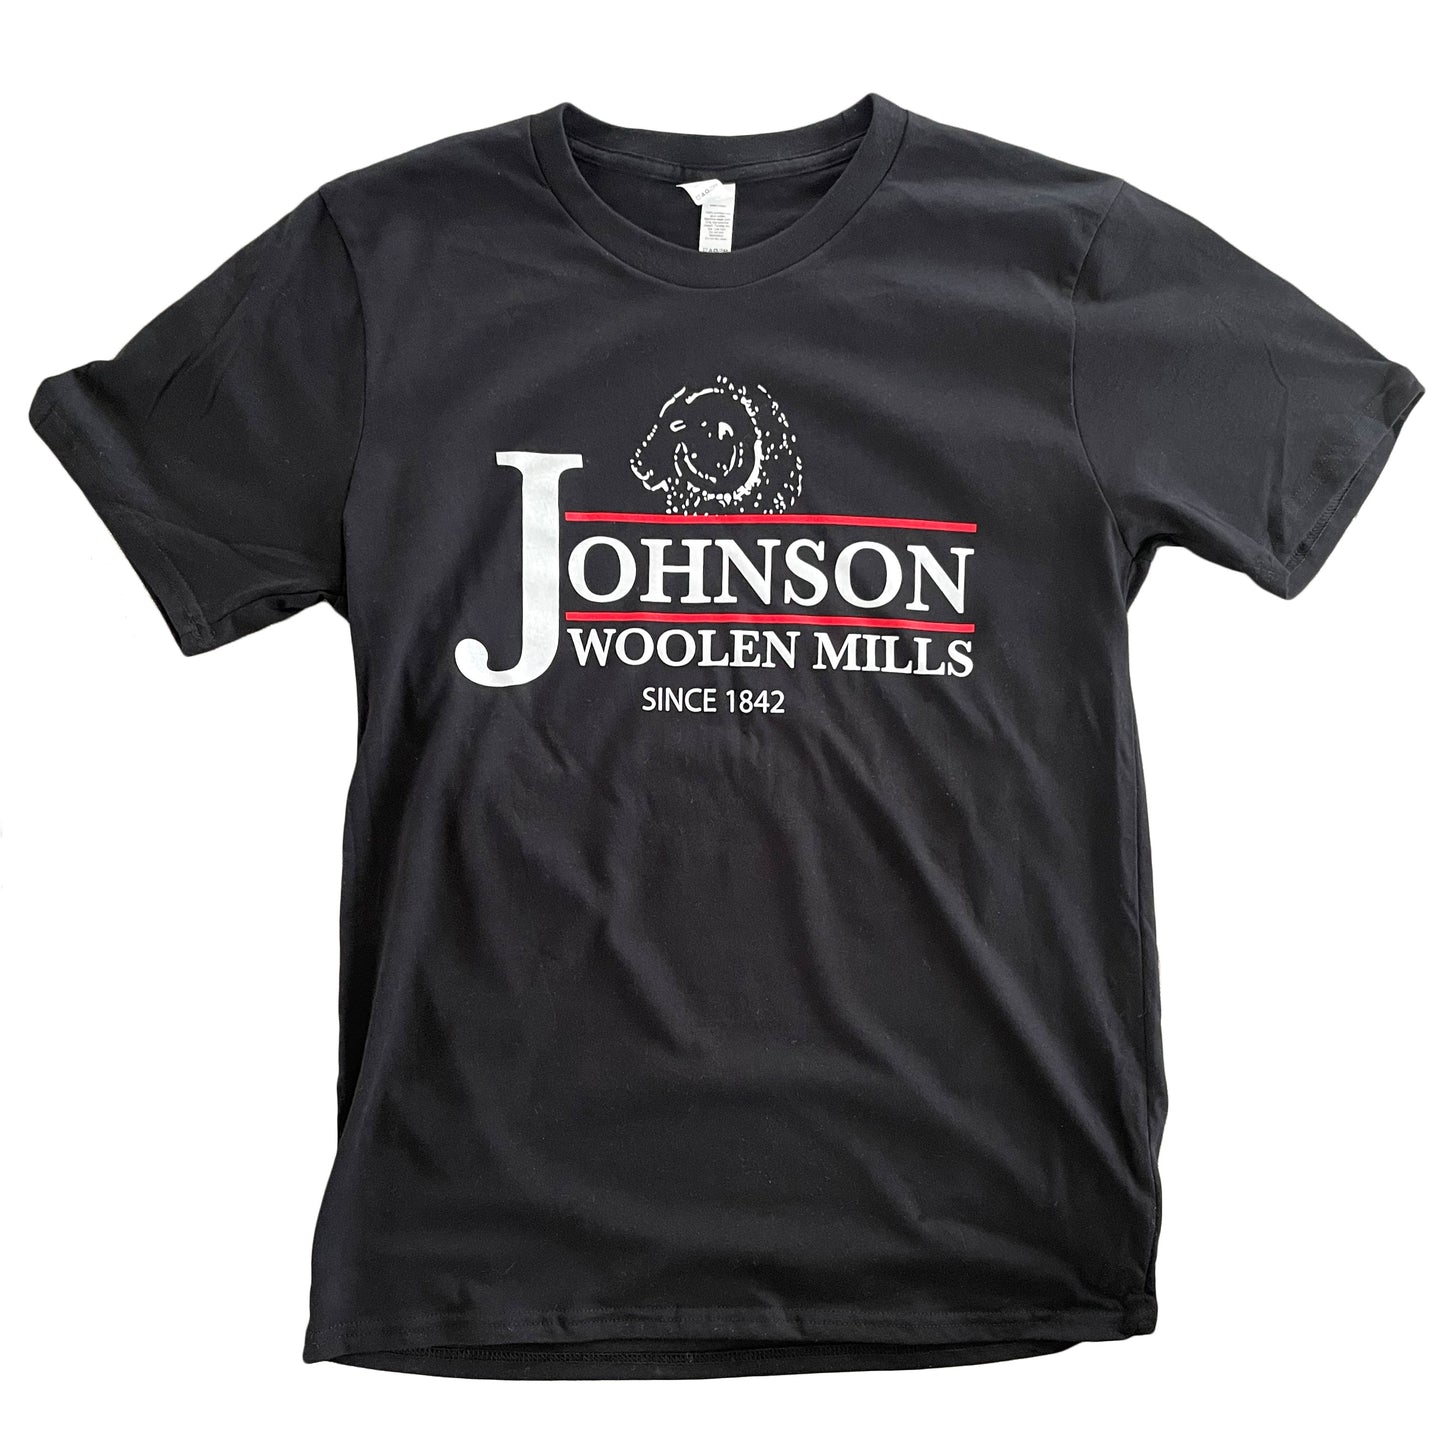 Black T-shirt with Johnson Woolen Mills logo screen printed on front